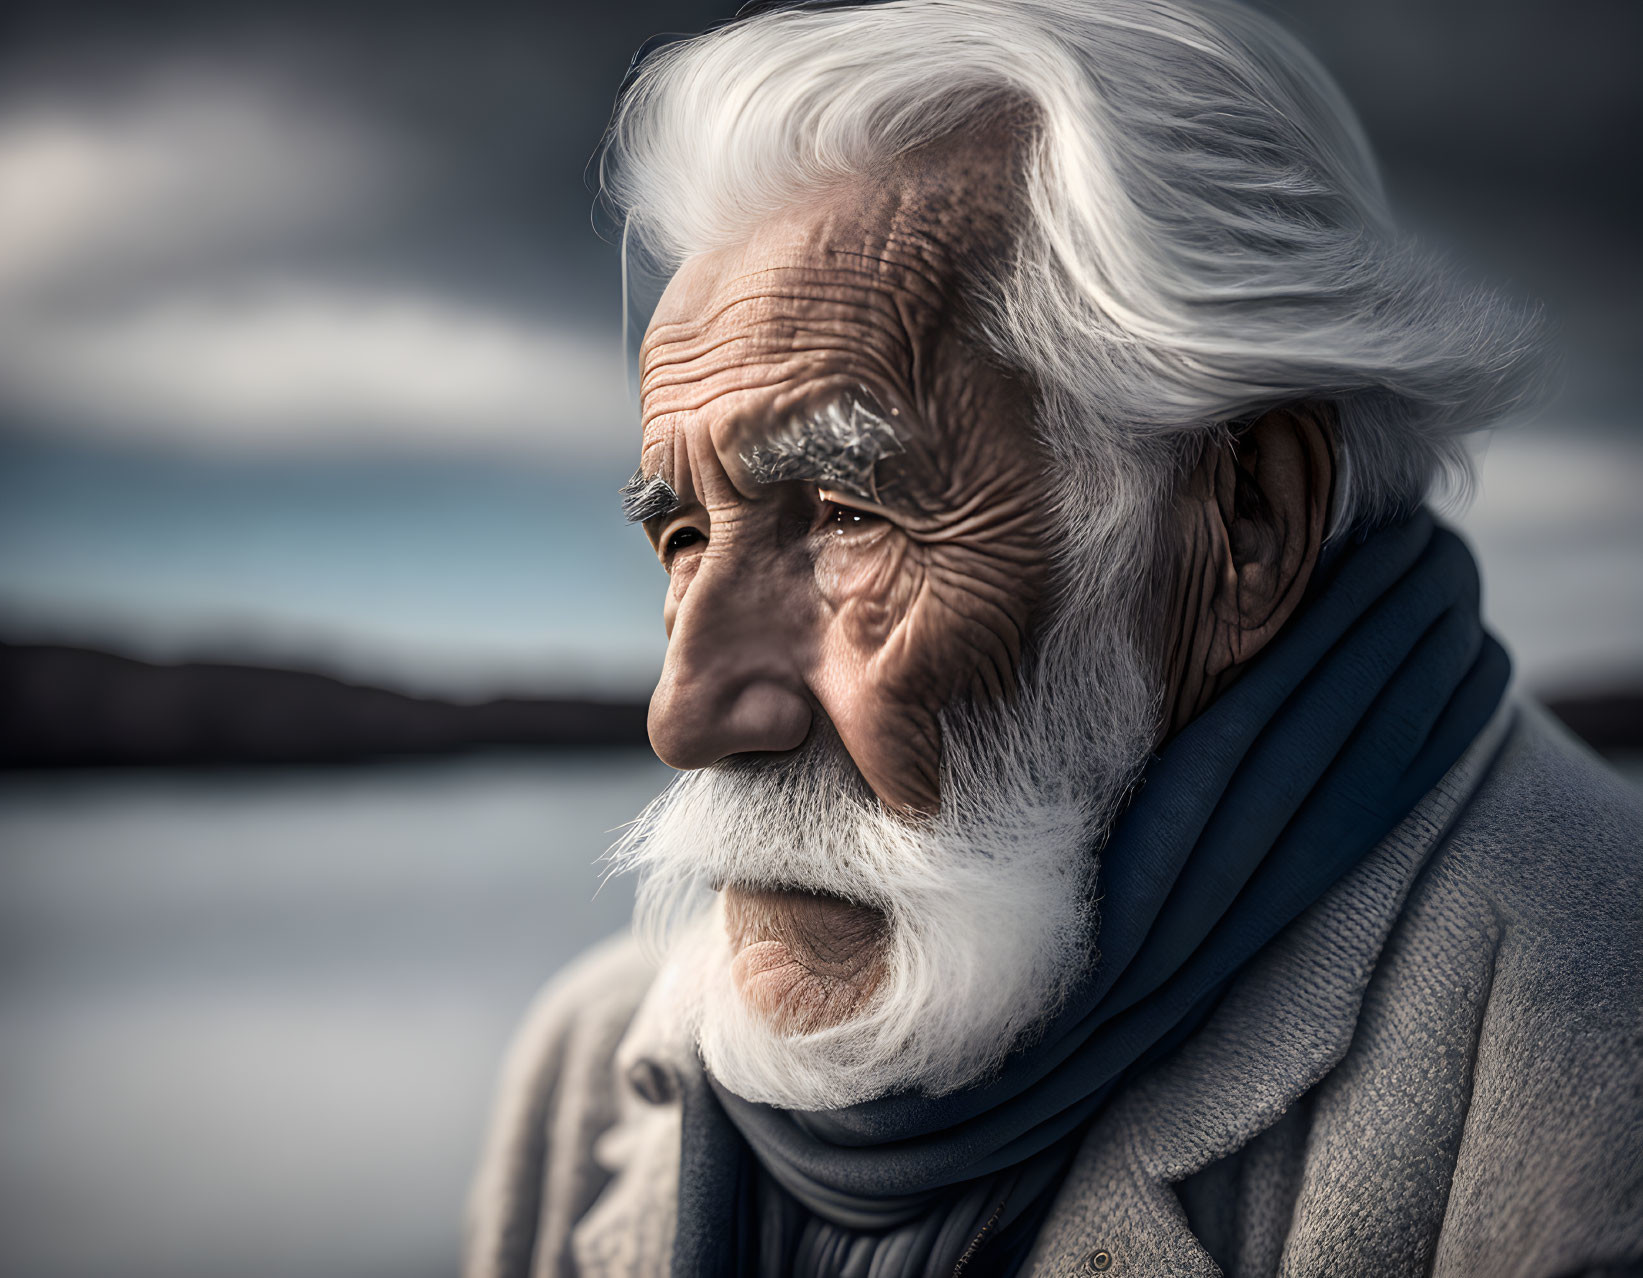 Elderly man with white beard and coat under cloudy sky